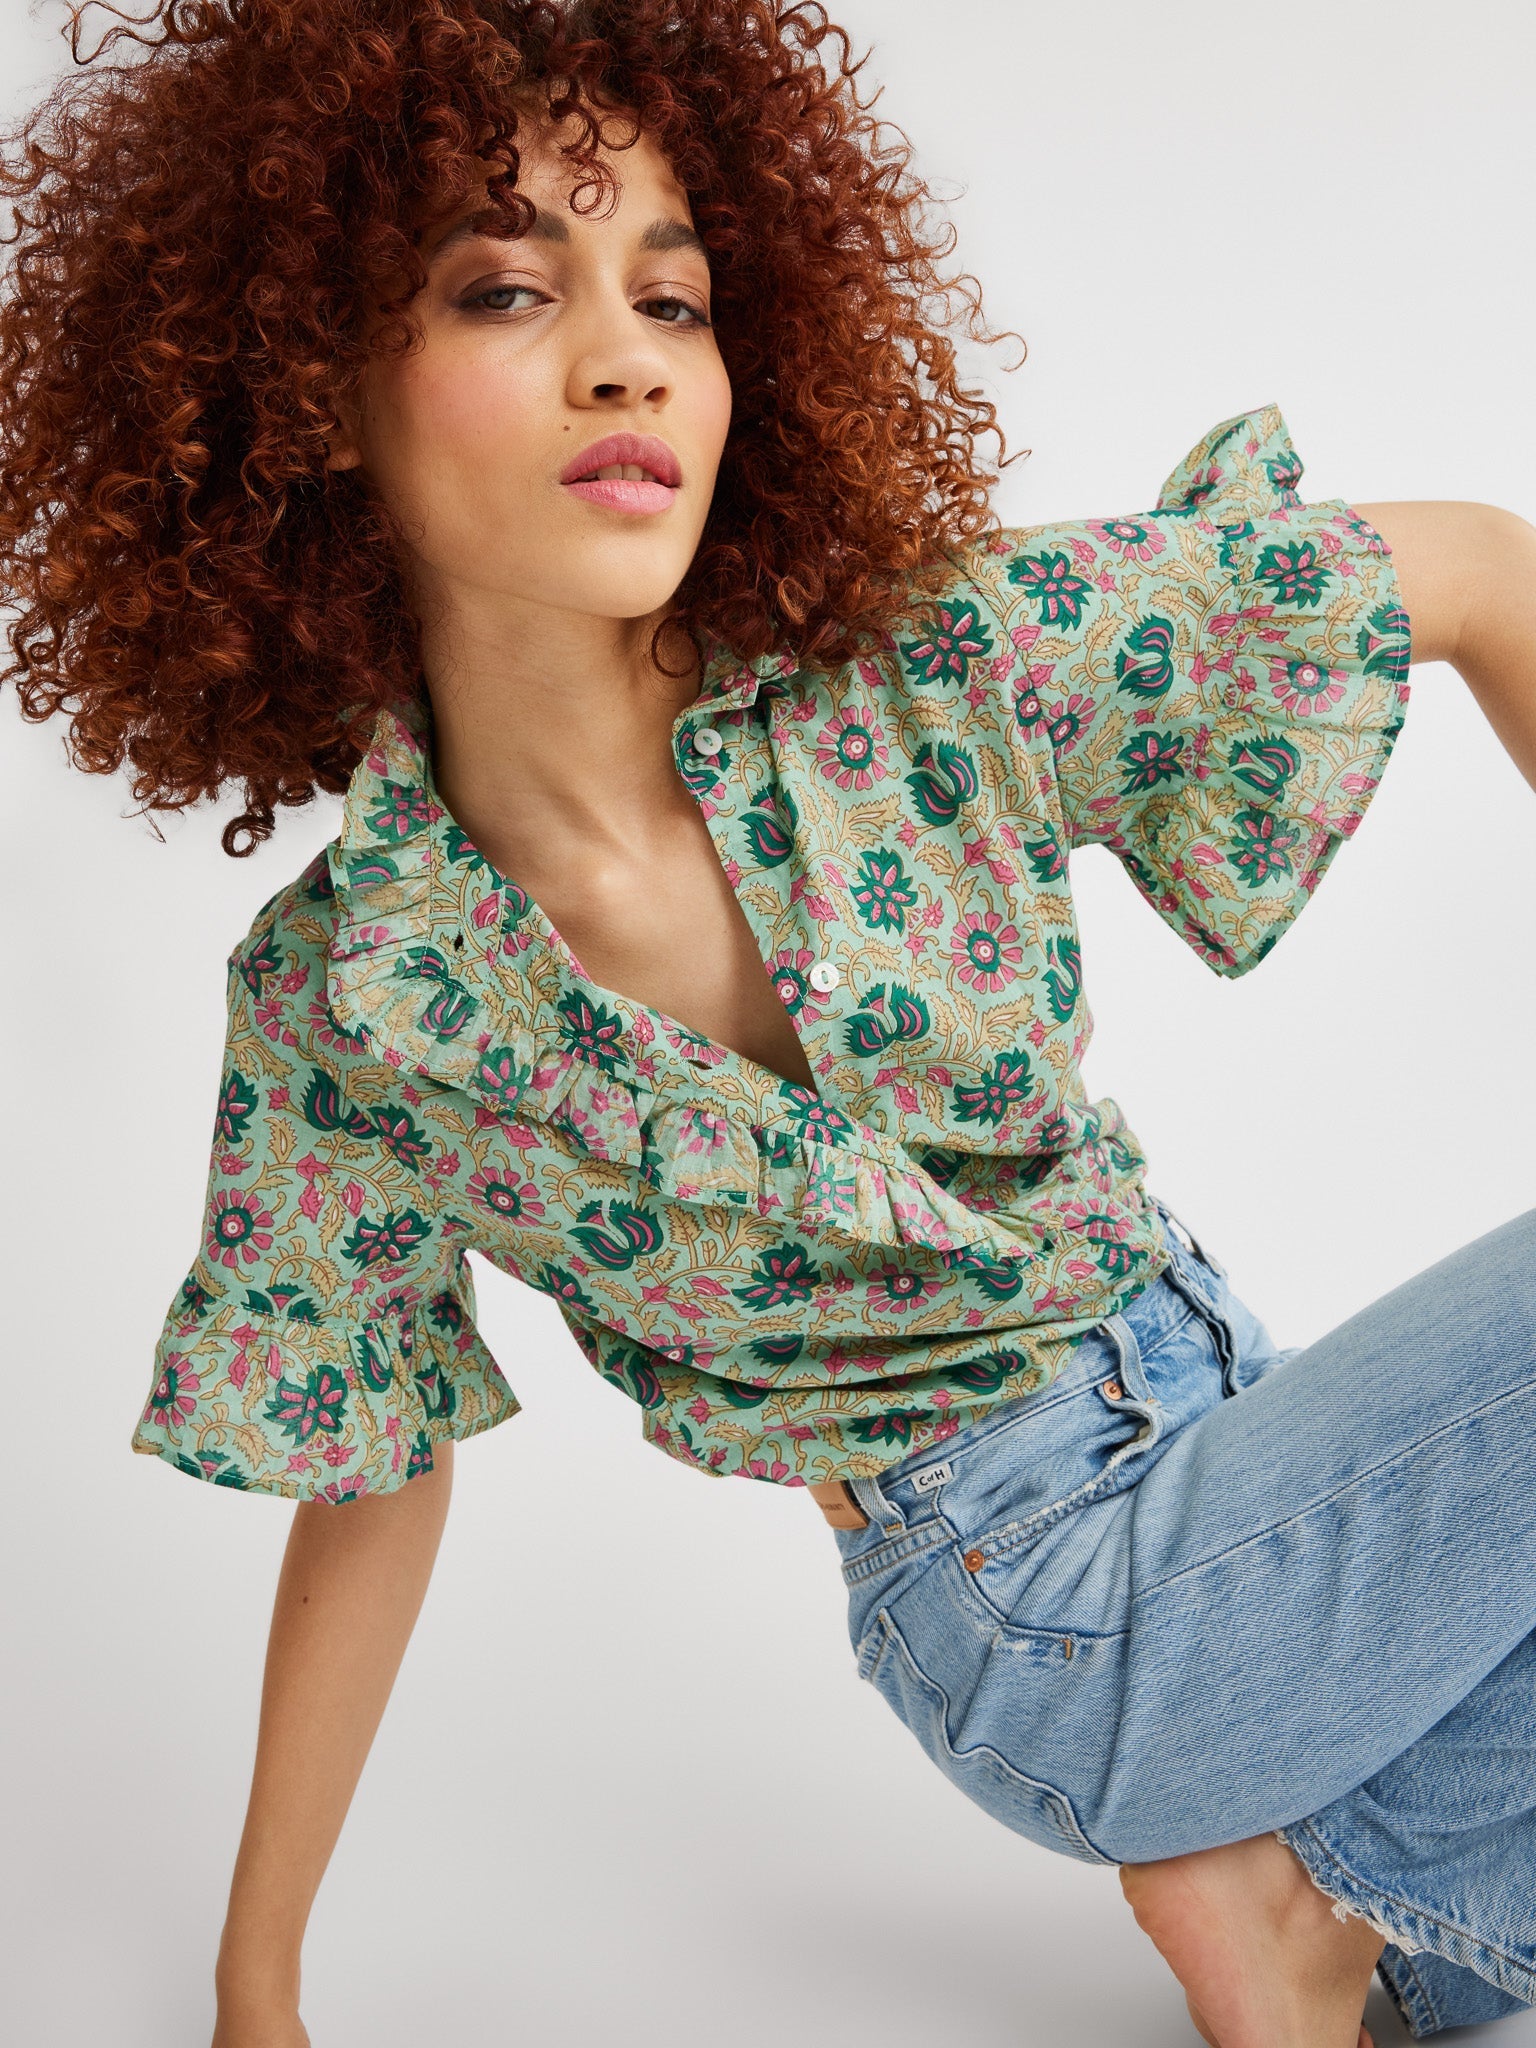 MILLE Clothing Vanessa Top in Caribbean Floral